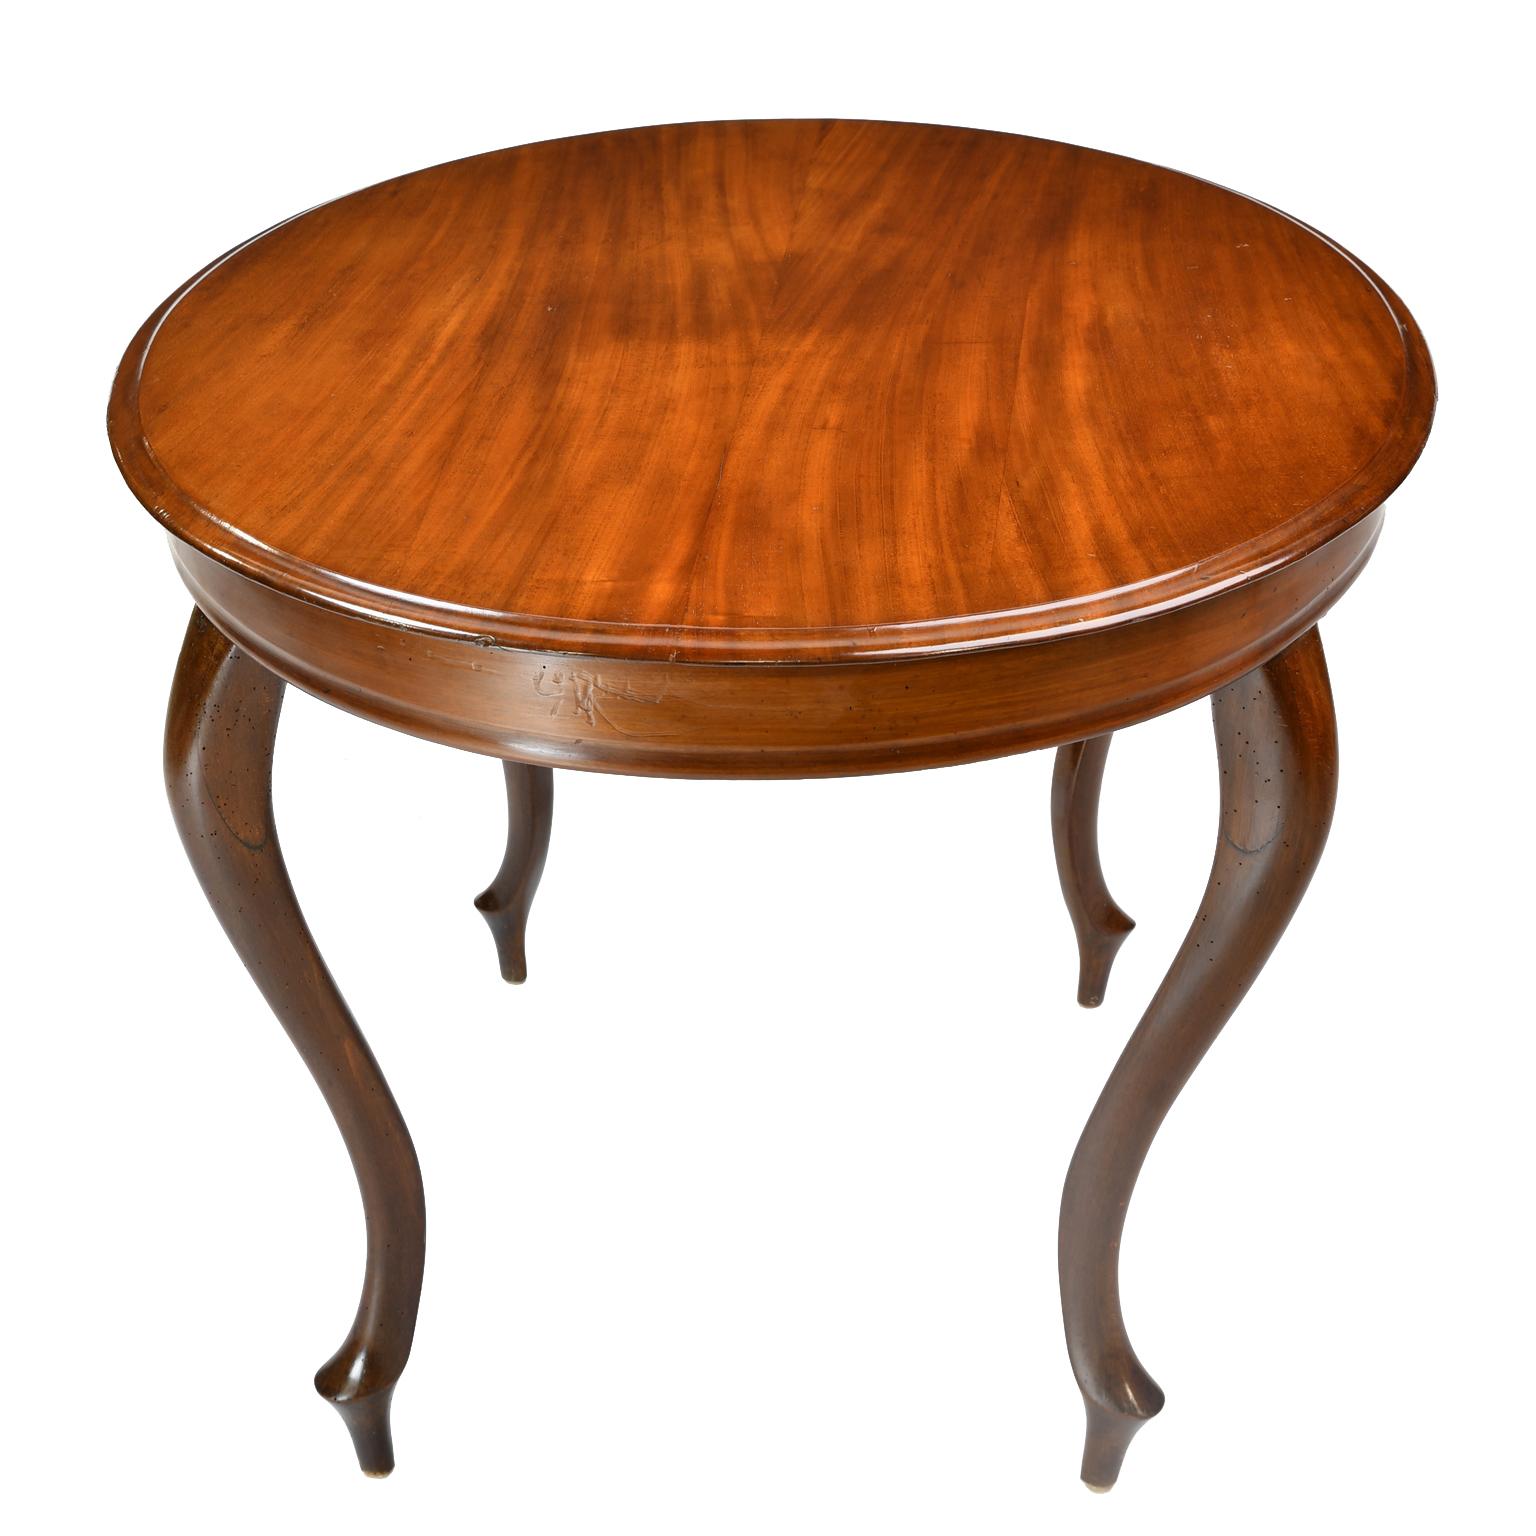 Antique Louis Philippe Style Mahogany Oval Dining/ Center Table, Denmark, c 1860 For Sale 1